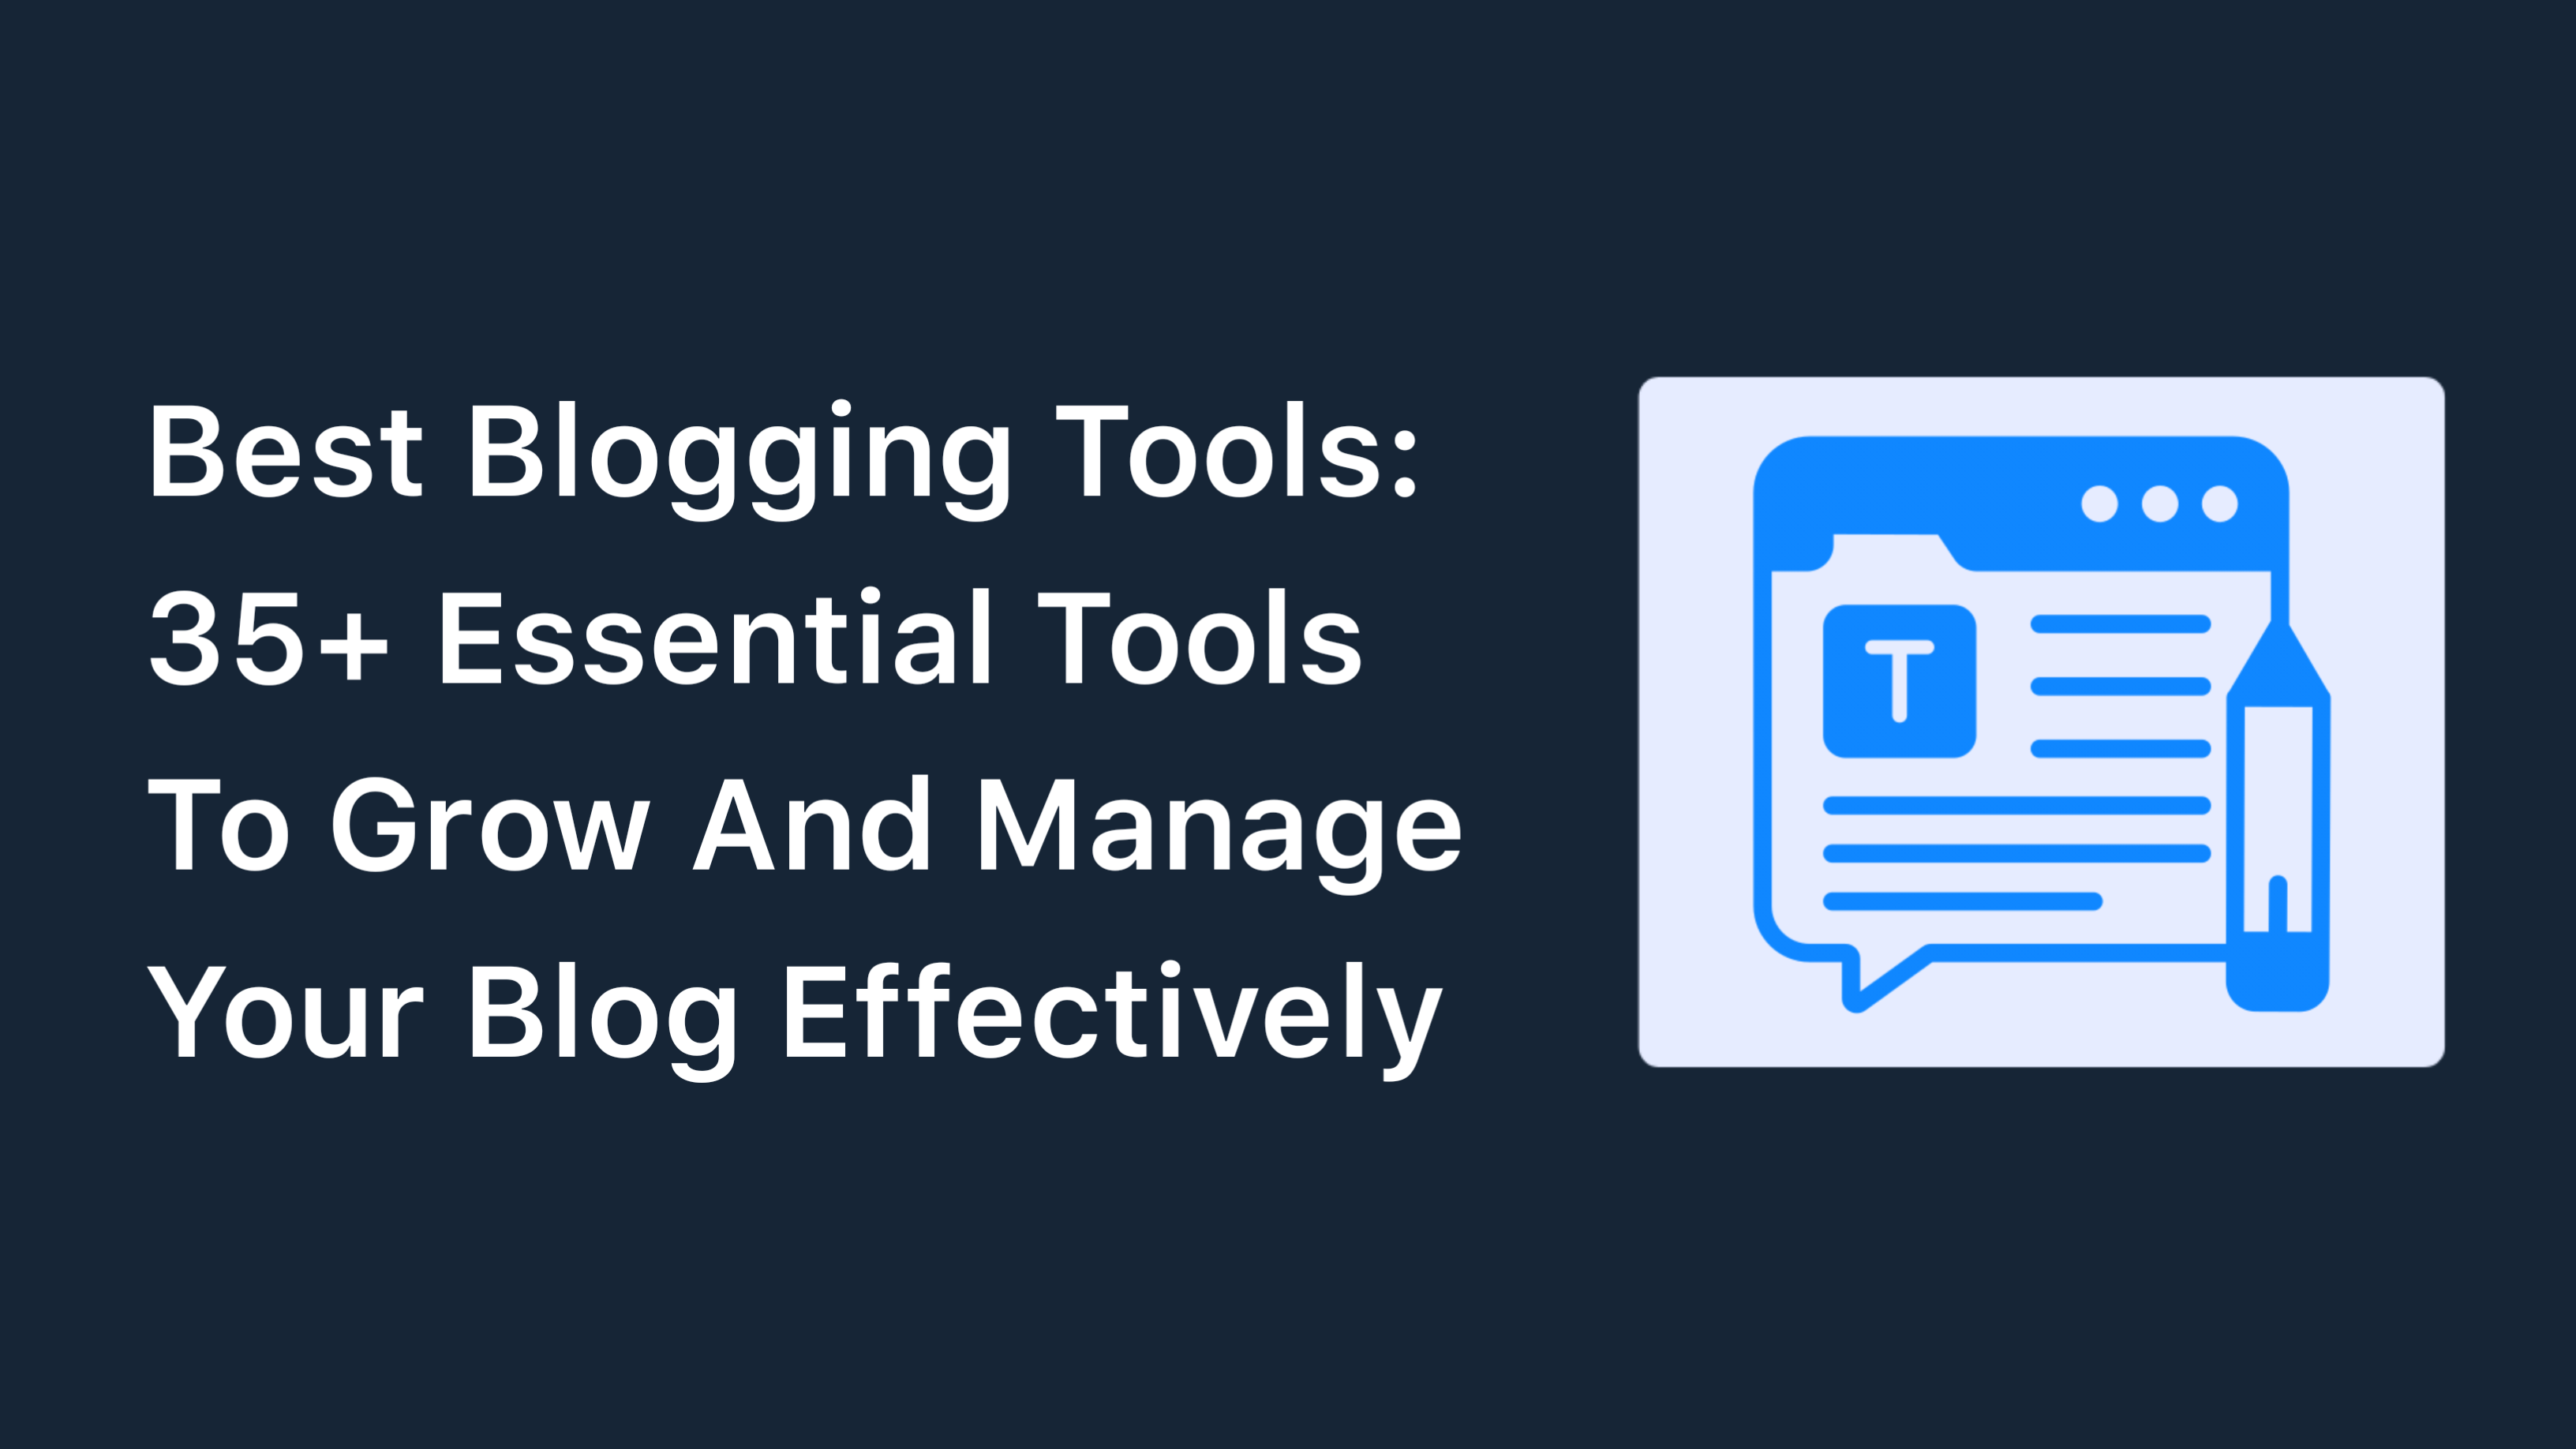 Best Blogging Tools: 36 Tools To Grow And Manage Your Blog